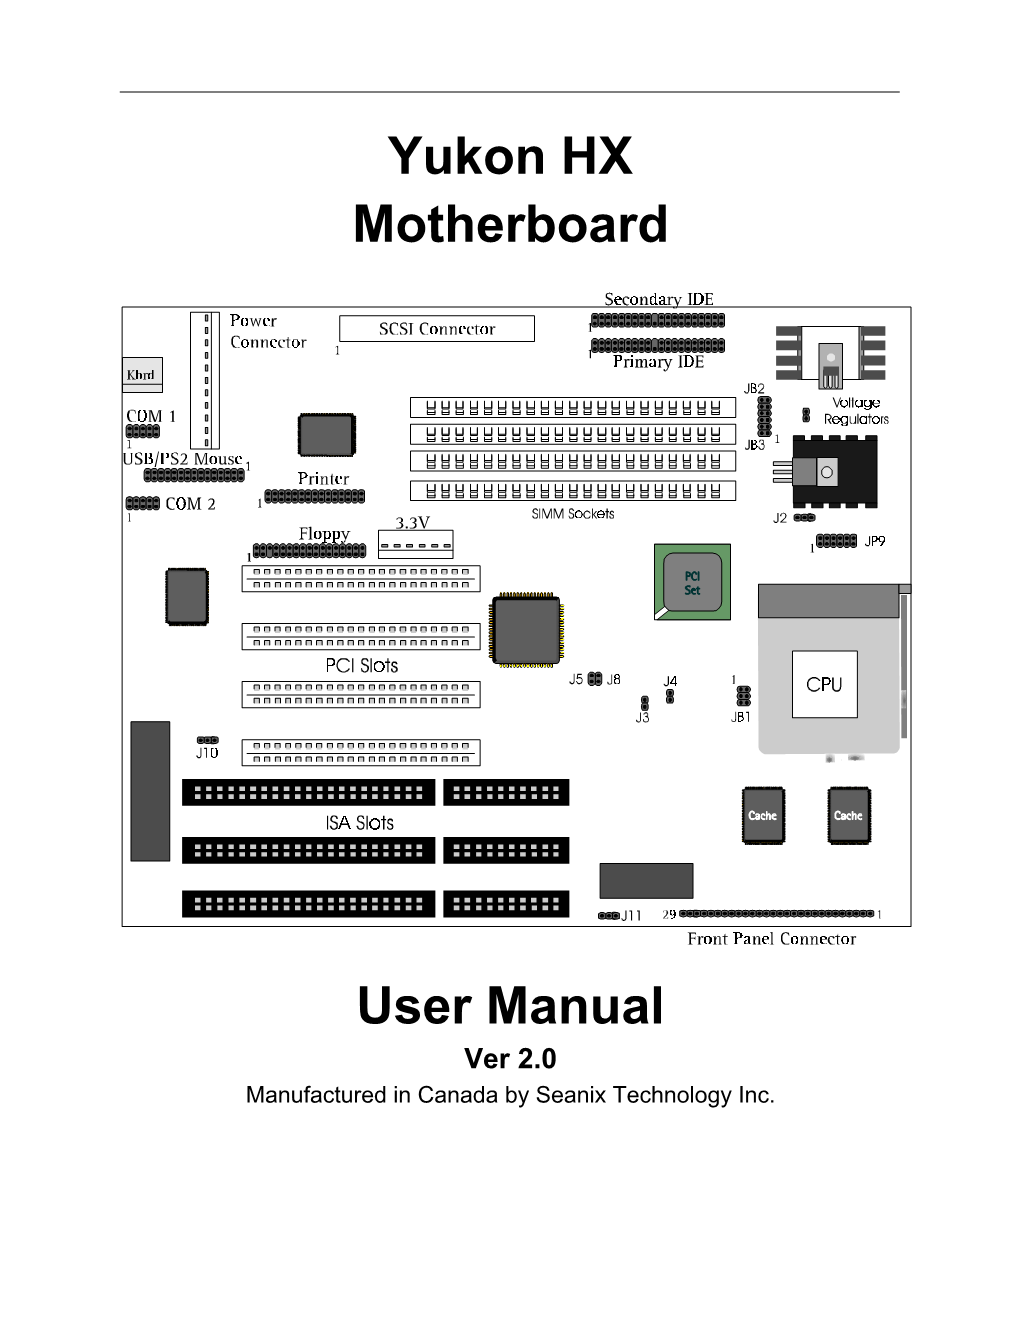 Yukon HX Motherboard User Manual 1 Memory the Yukon HX Motherboard Supports Base (Conventional) and Extended Memory